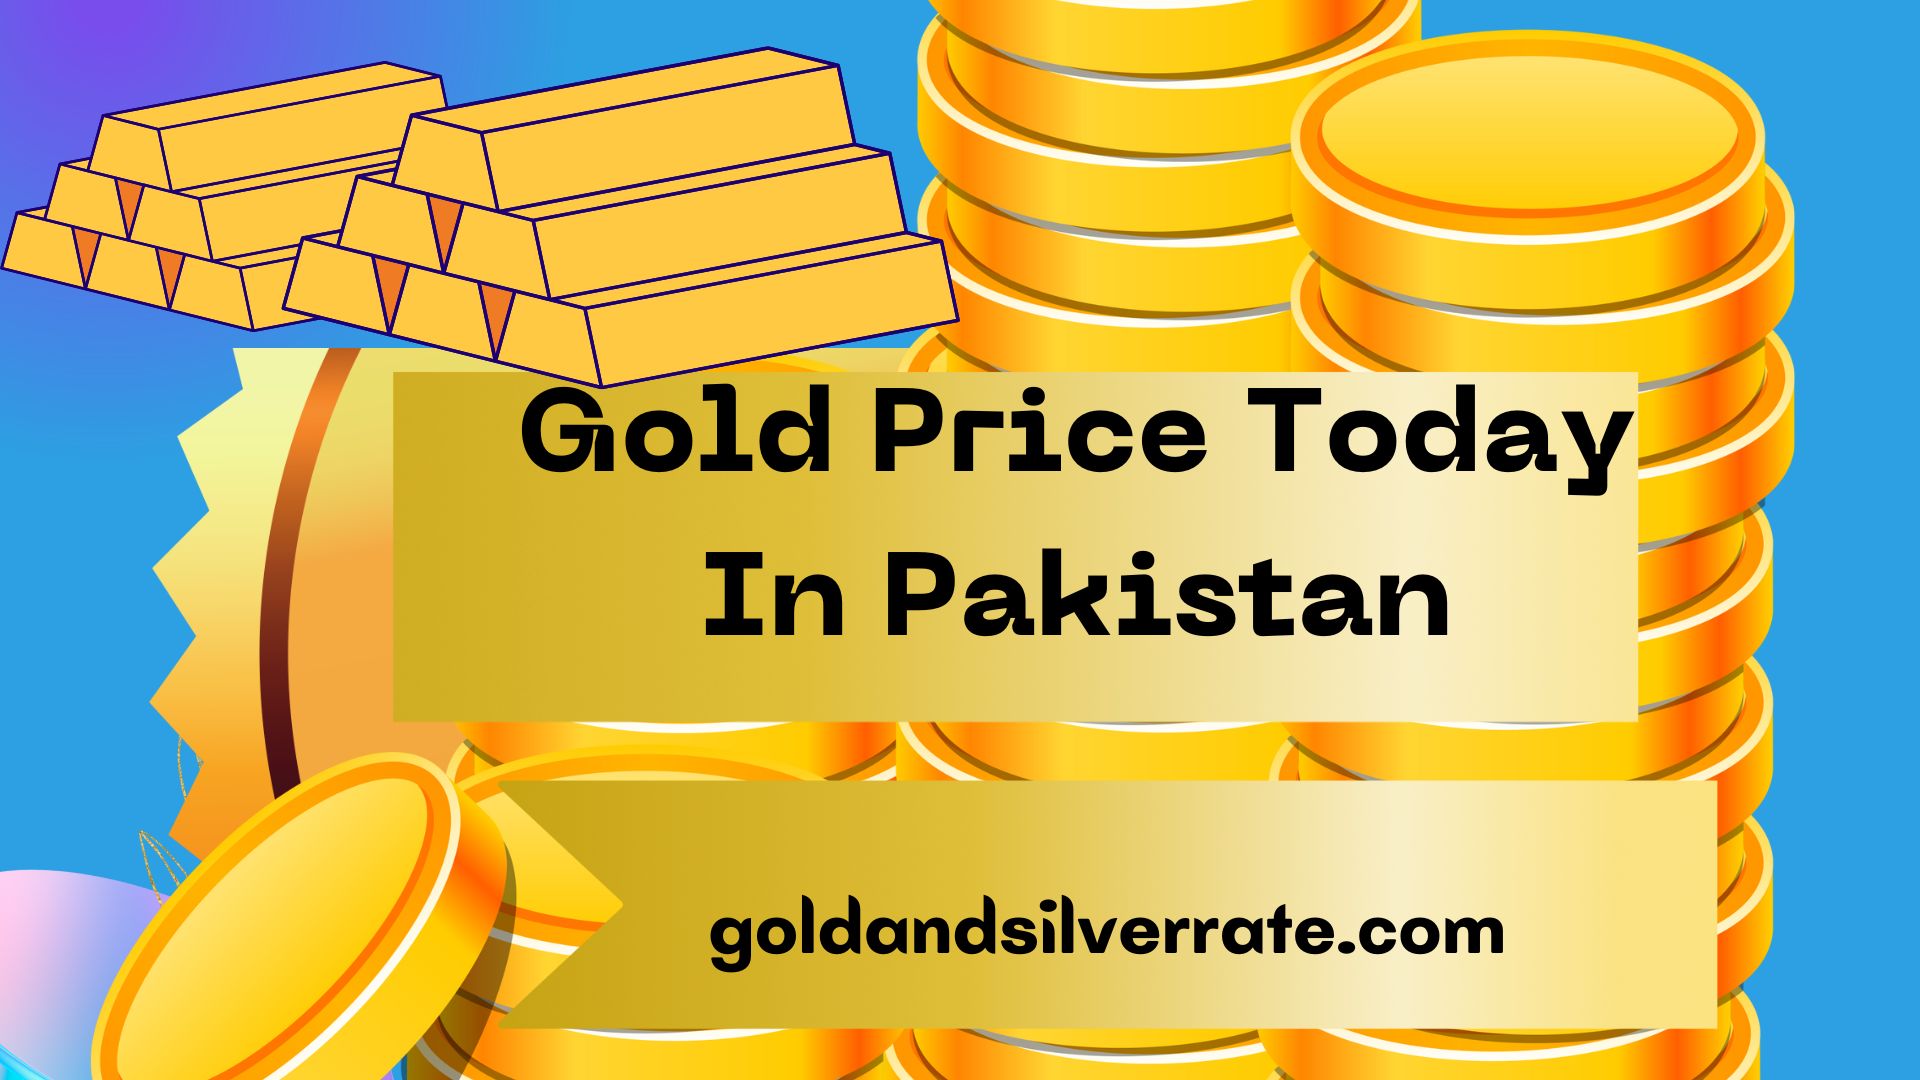 Gold Price Today In Pakistan